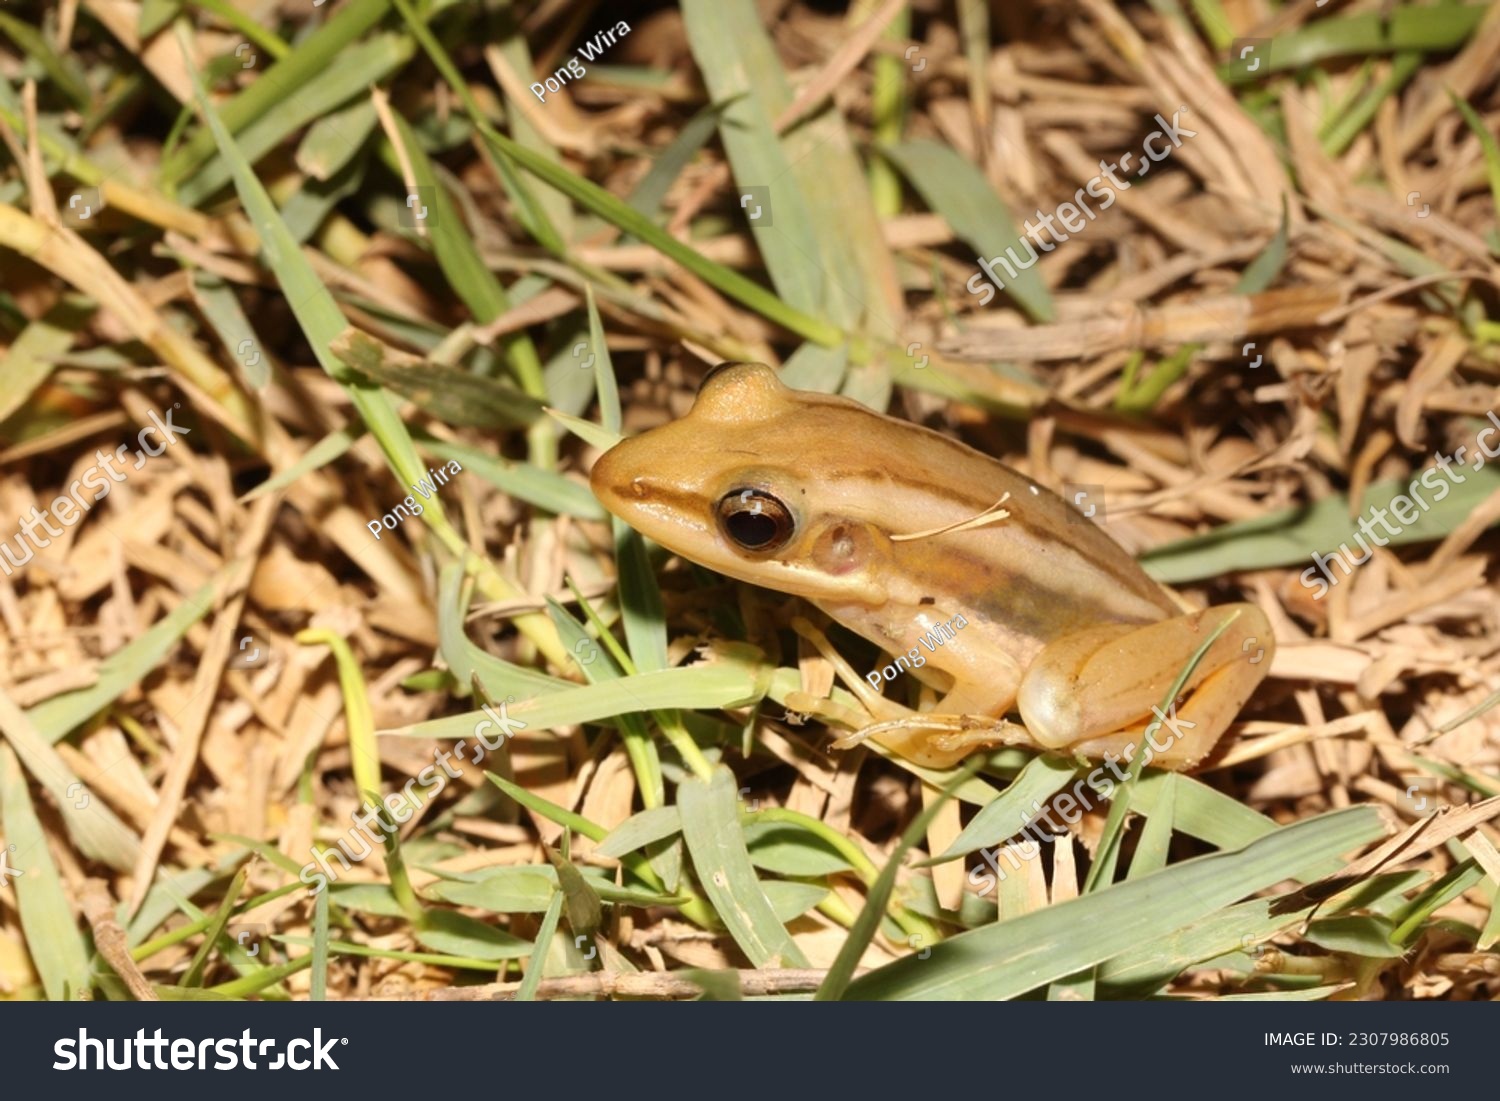 Green paddy frog, Red-eared frog (Hylarana erythraea, Ranidae) is found throughout much of southeast Asia. It is mostly found in thick floating marsh vegetation, particularly at the edge of ponds. #2307986805